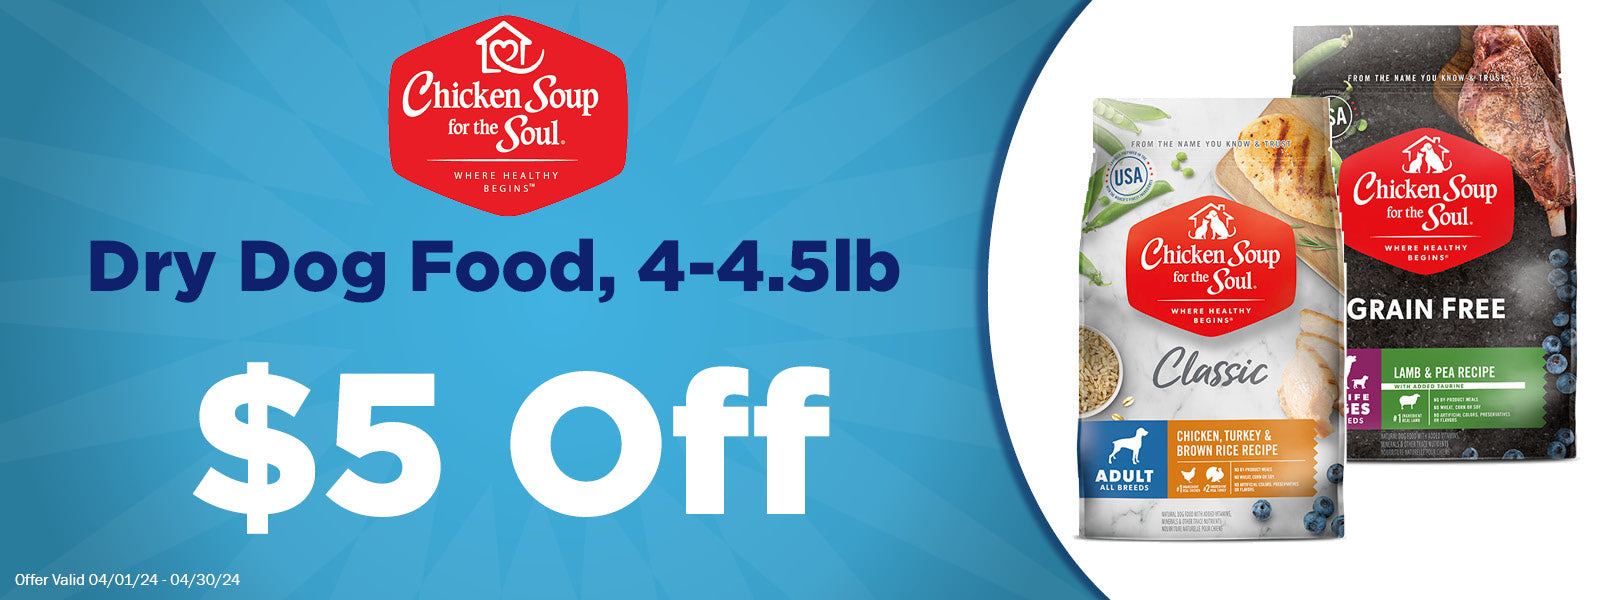 Chicken Soup for the Soul Dry Dog Food 4.5lb $5 Off